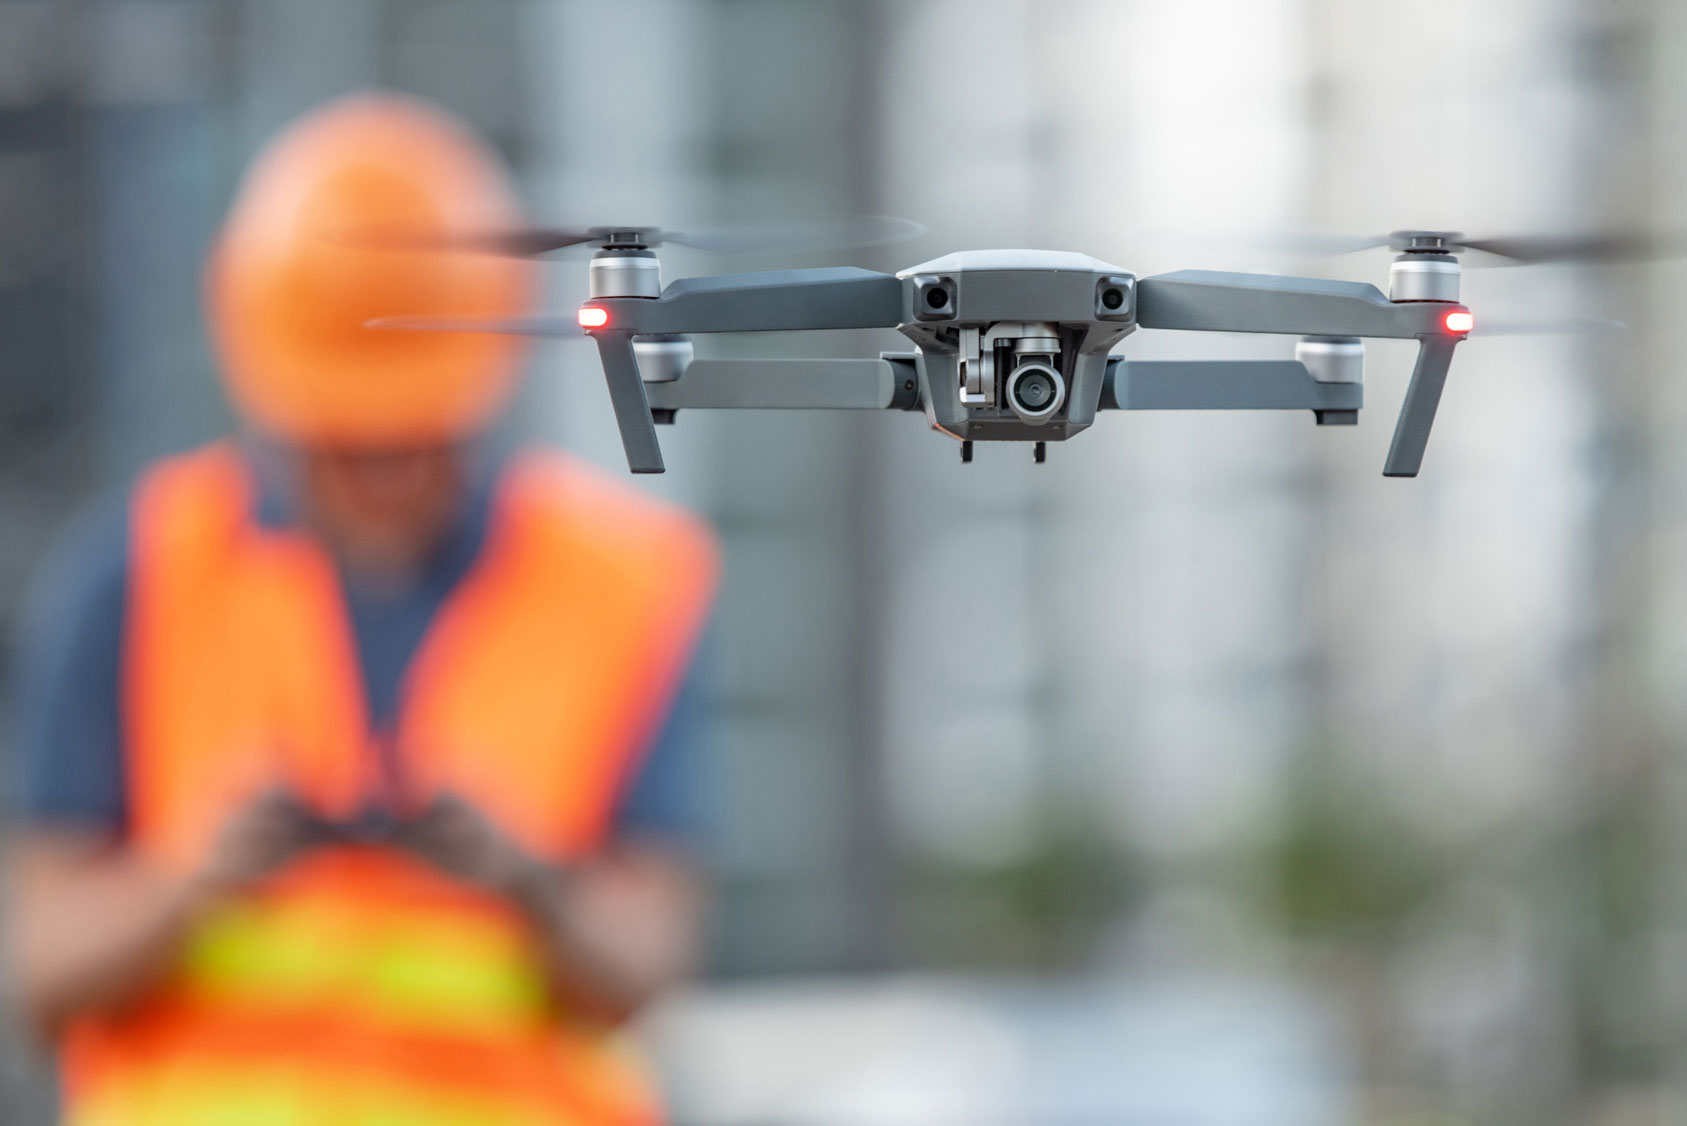 A drone hovering close to the camera with an operator controlling it in the background.